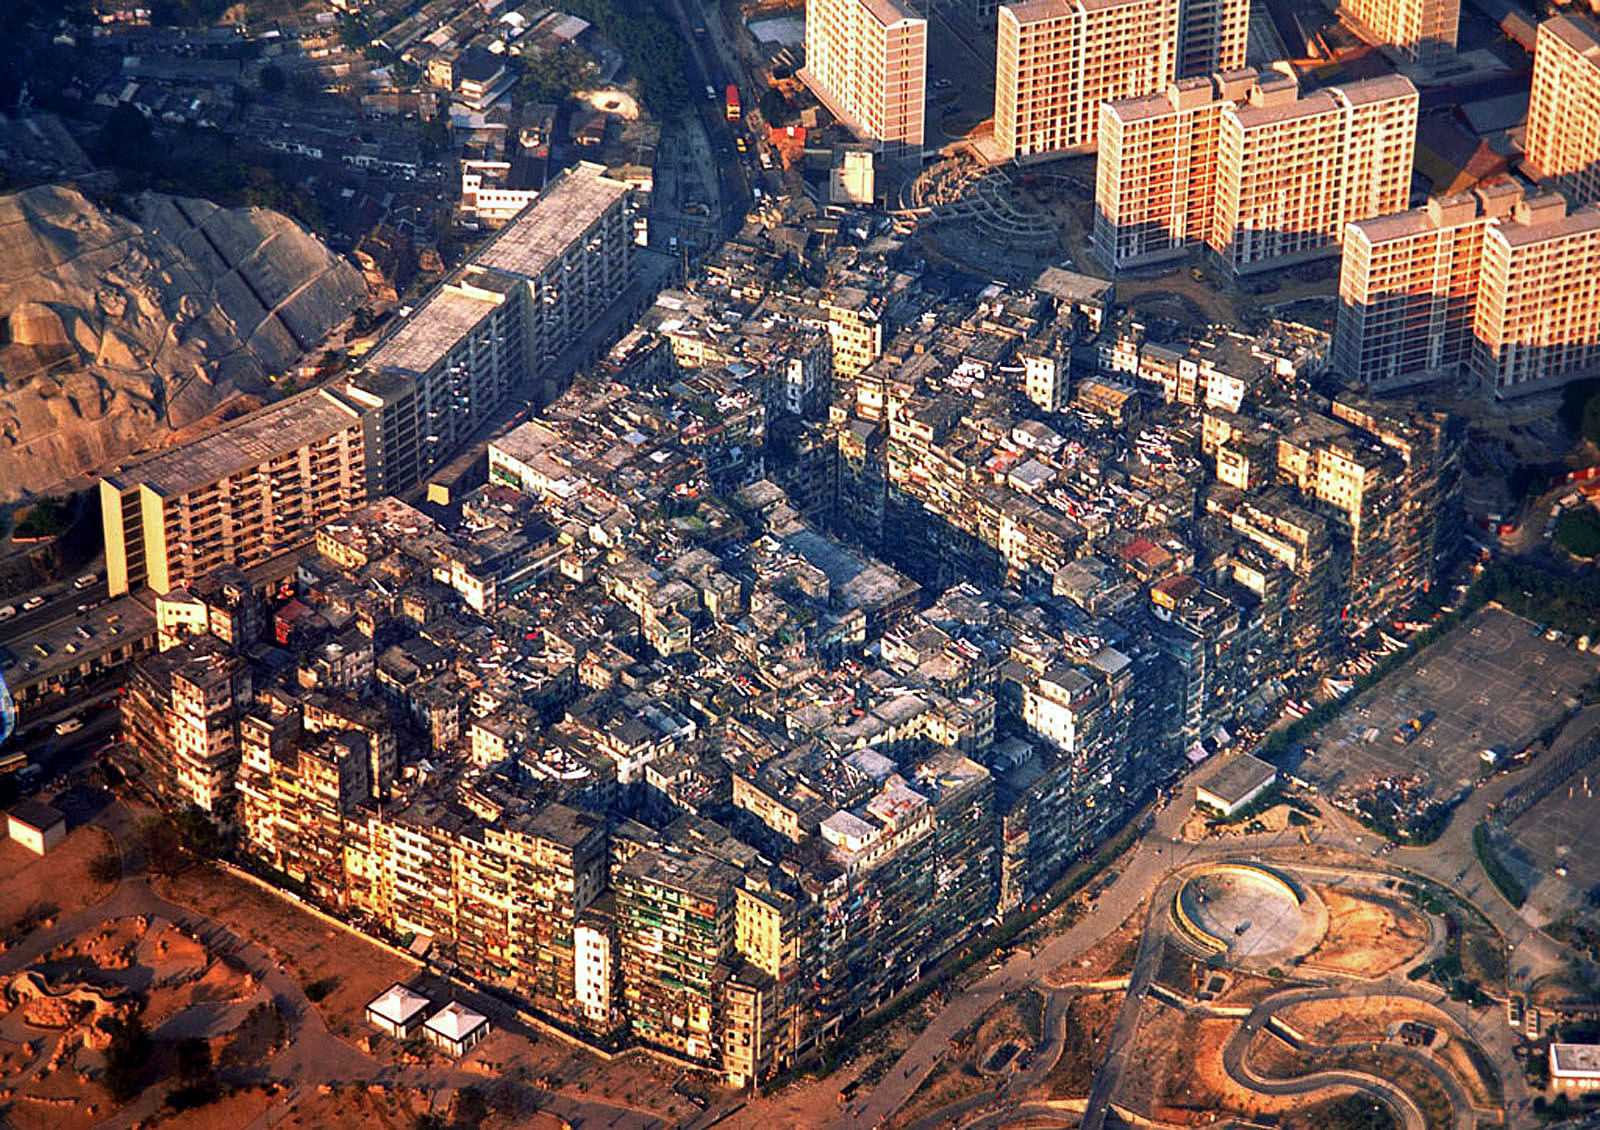 The walled city of Kowloon-Kowloon Walled City was a densely populated, largely ungoverned settlement in New Kowloon, Hong Kong. Originally a Chinese military fort, the Walled City became an enclave after the New Territories were leased to Britain in 1898. Its population increased dramatically following the Japanese occupation of Hong Kong during World War II. In 1987, the Walled City contained 33,000 residents within its 2.6-hectare "0.010 sq mi" borders. From the 1950s to the 1970s, it was controlled by Triads and had high rates of prostitution, gambling, and drug use.